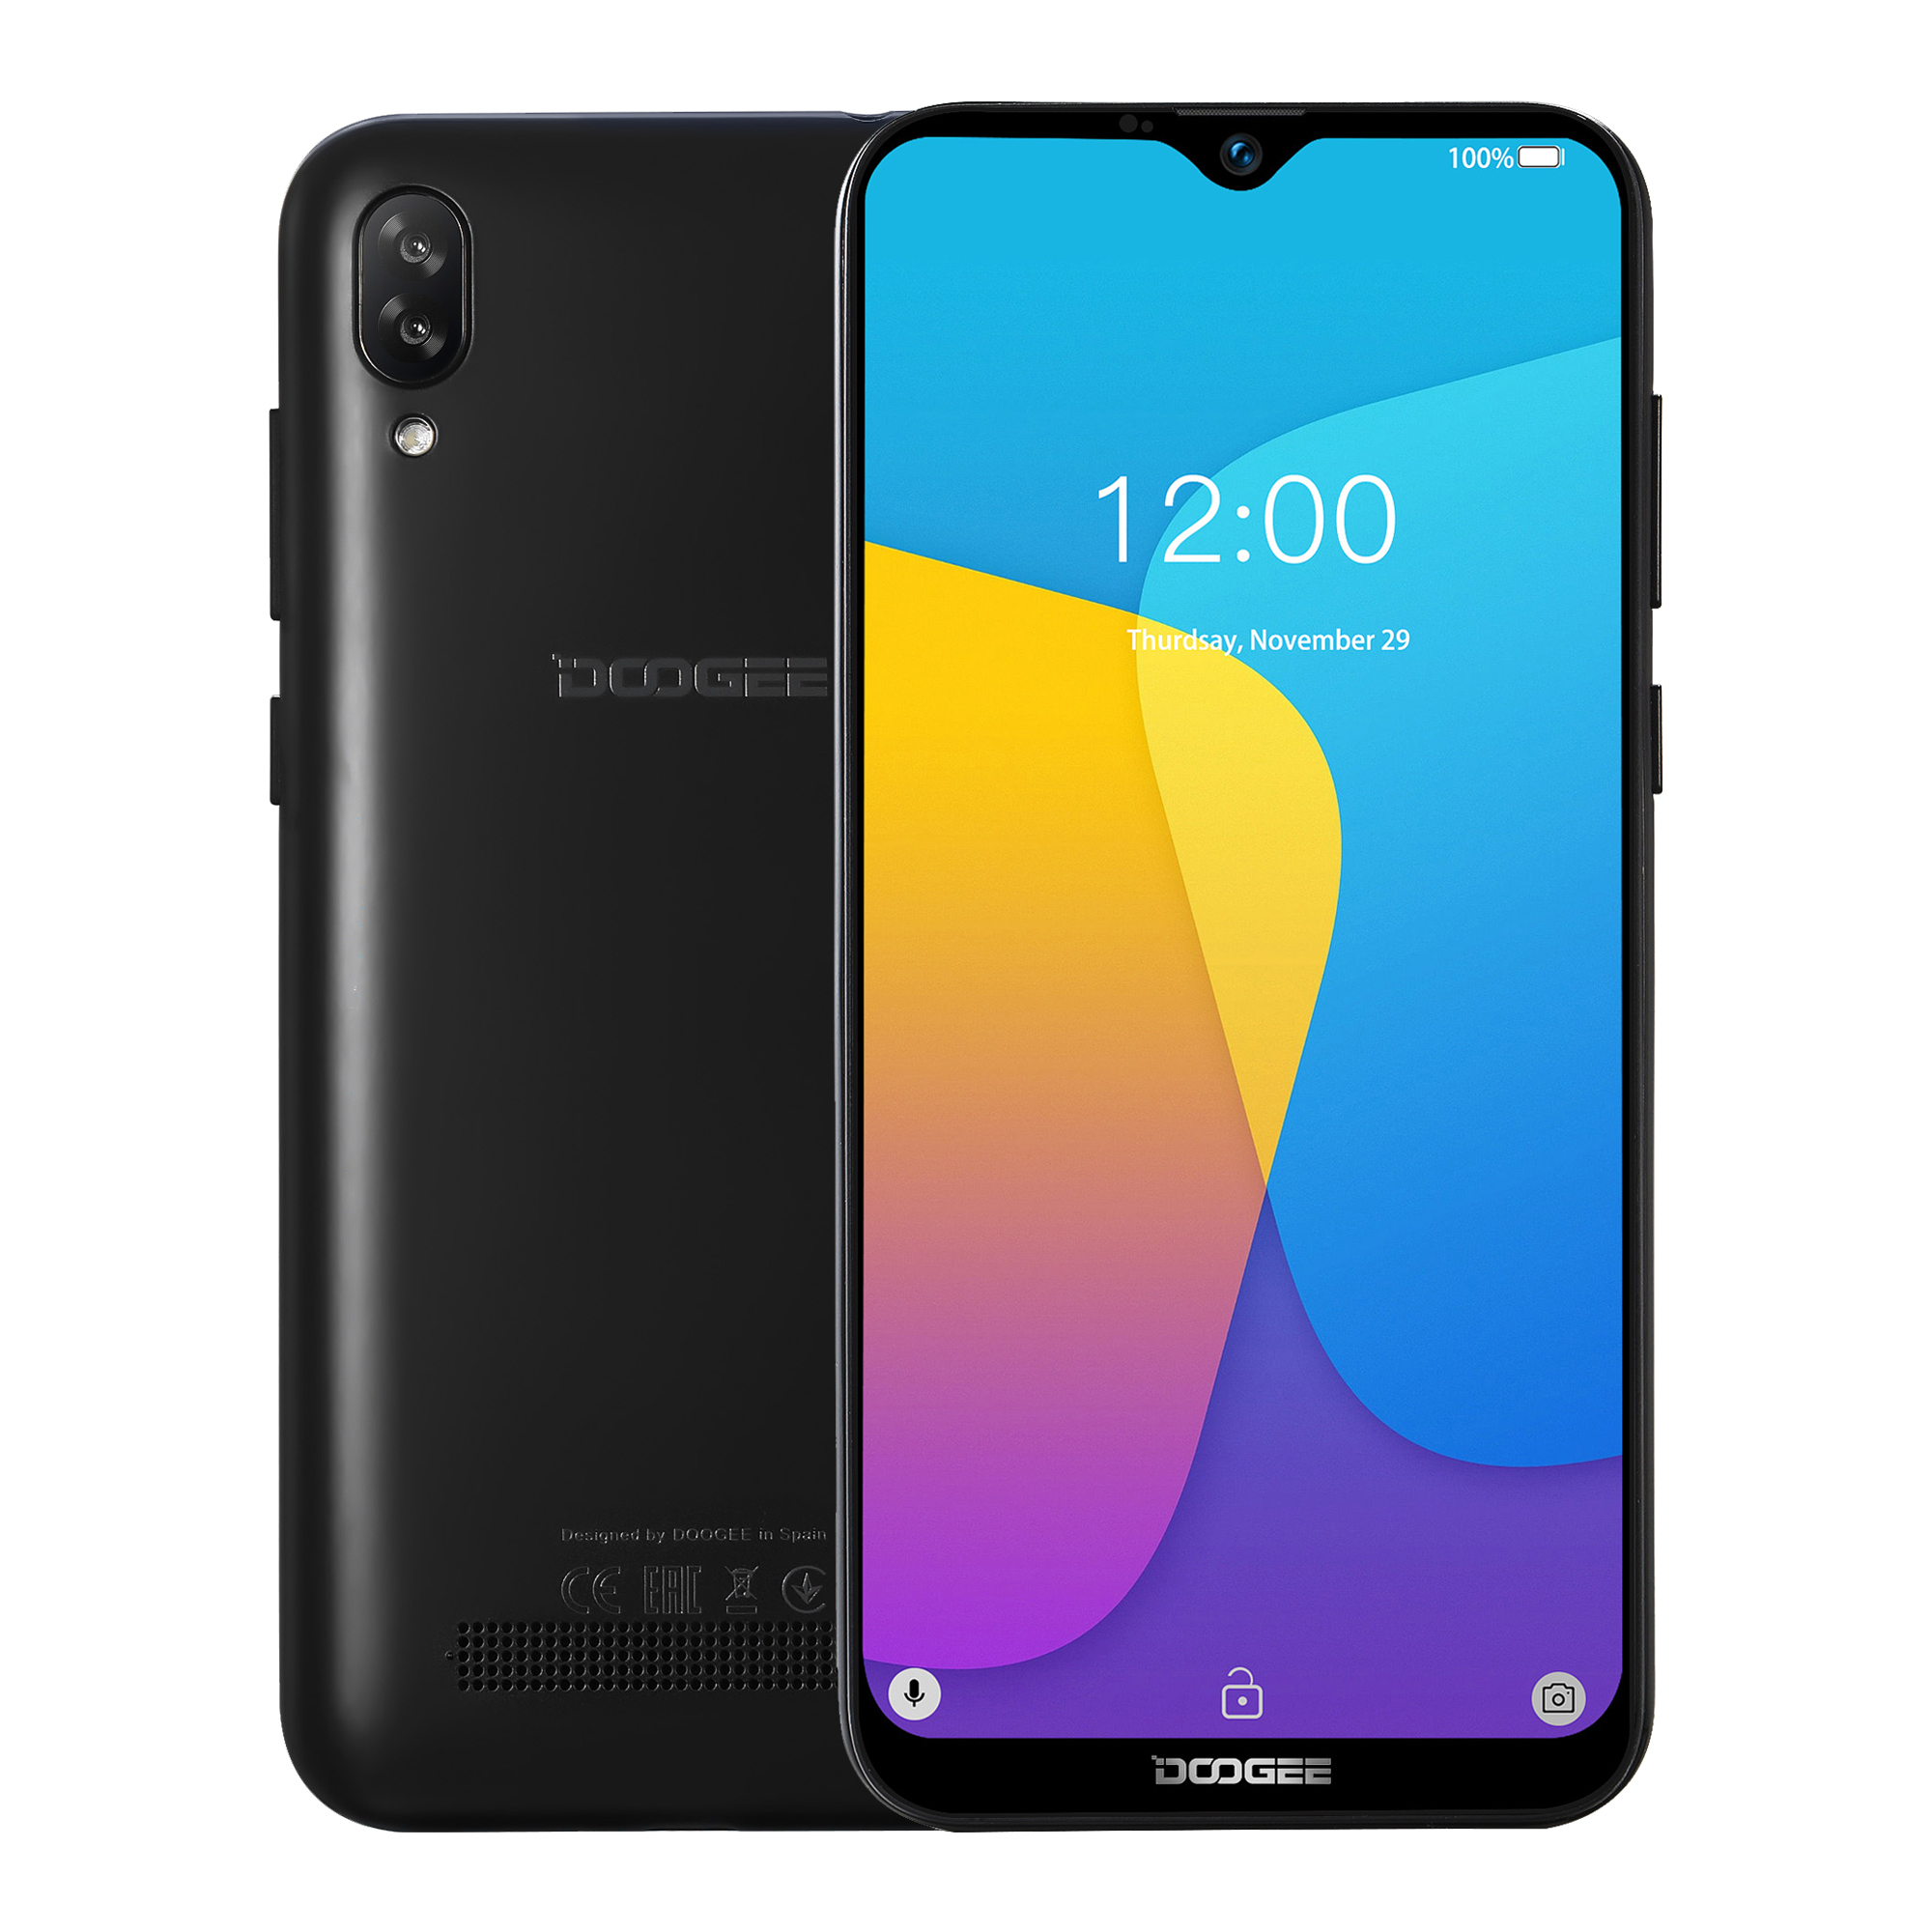 

DOOGEE Y8C 6.1 Inch HD Android 8.1 3400mAh Face Unlocking 1GB RAM 16GB ROM MTK6580A Quad Core 1.3GHz 3G Smartphone